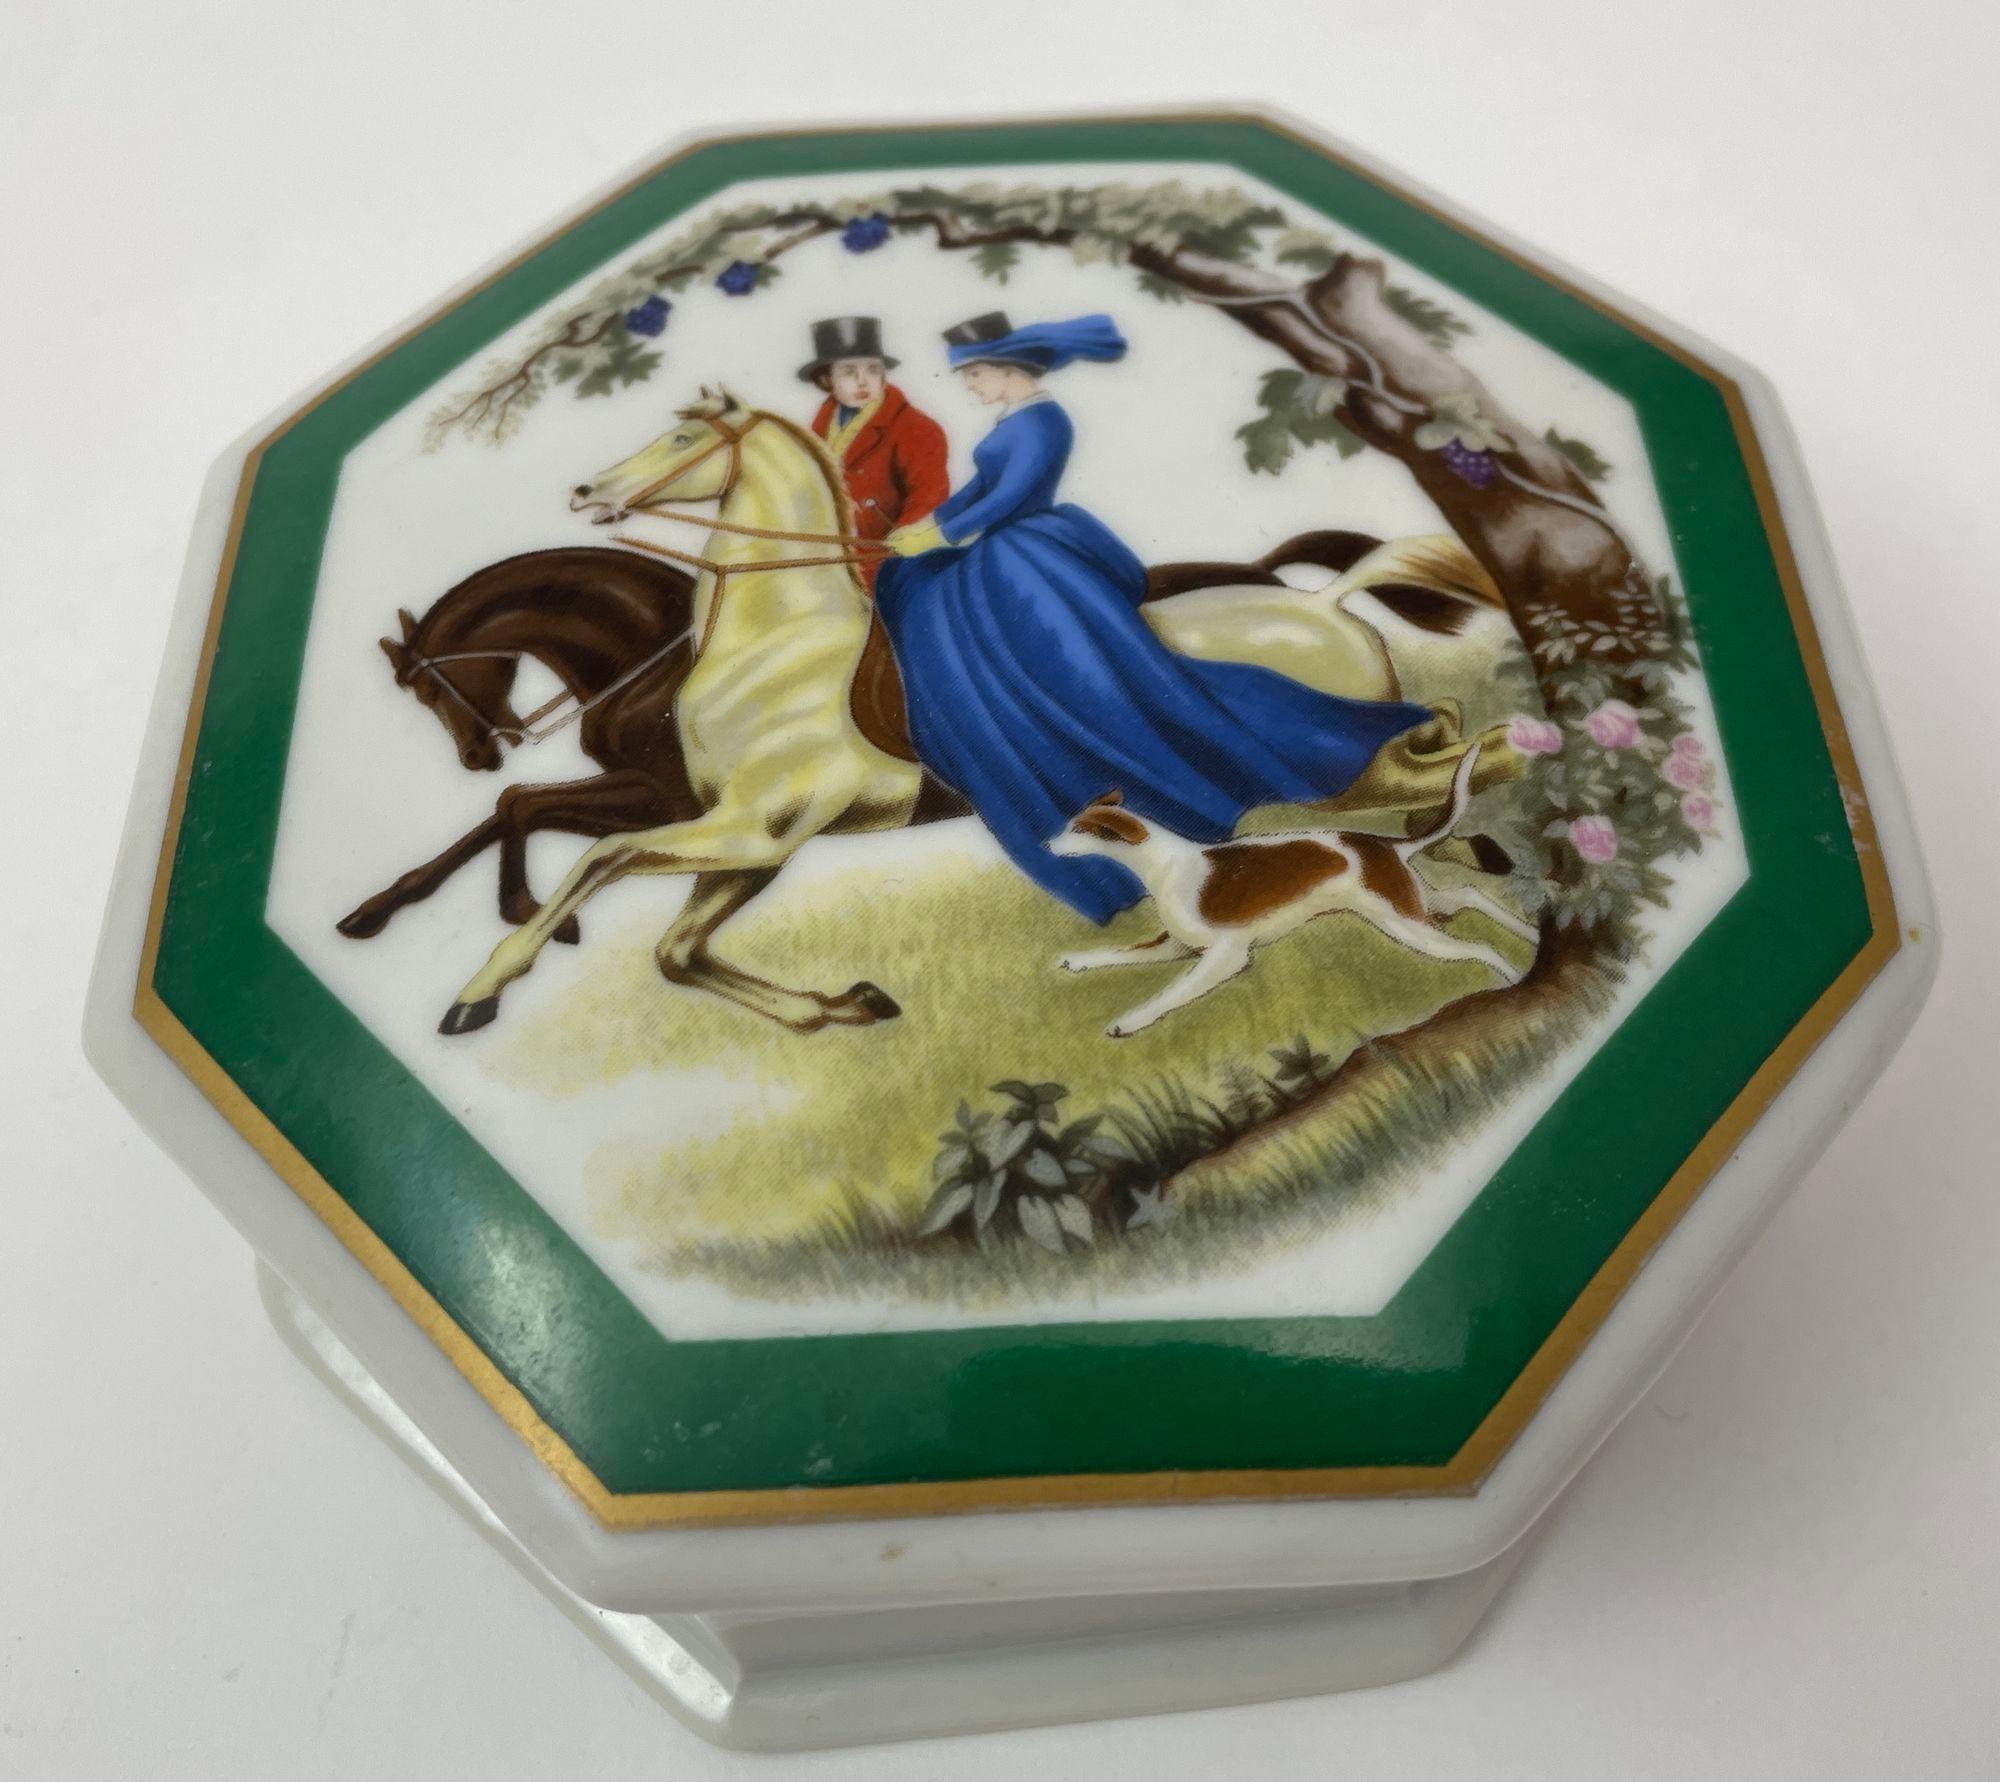 Vintage Southern Heirlooms Elizabeth Arden Trinket Box Porcelain Octagonal Shaped.
Southern Heirlooms Trinket Box Made in Japan.
Southern Heirlooms Elizabeth Arden trinket box with a hand painted romantic scene, English Colonial style period scene